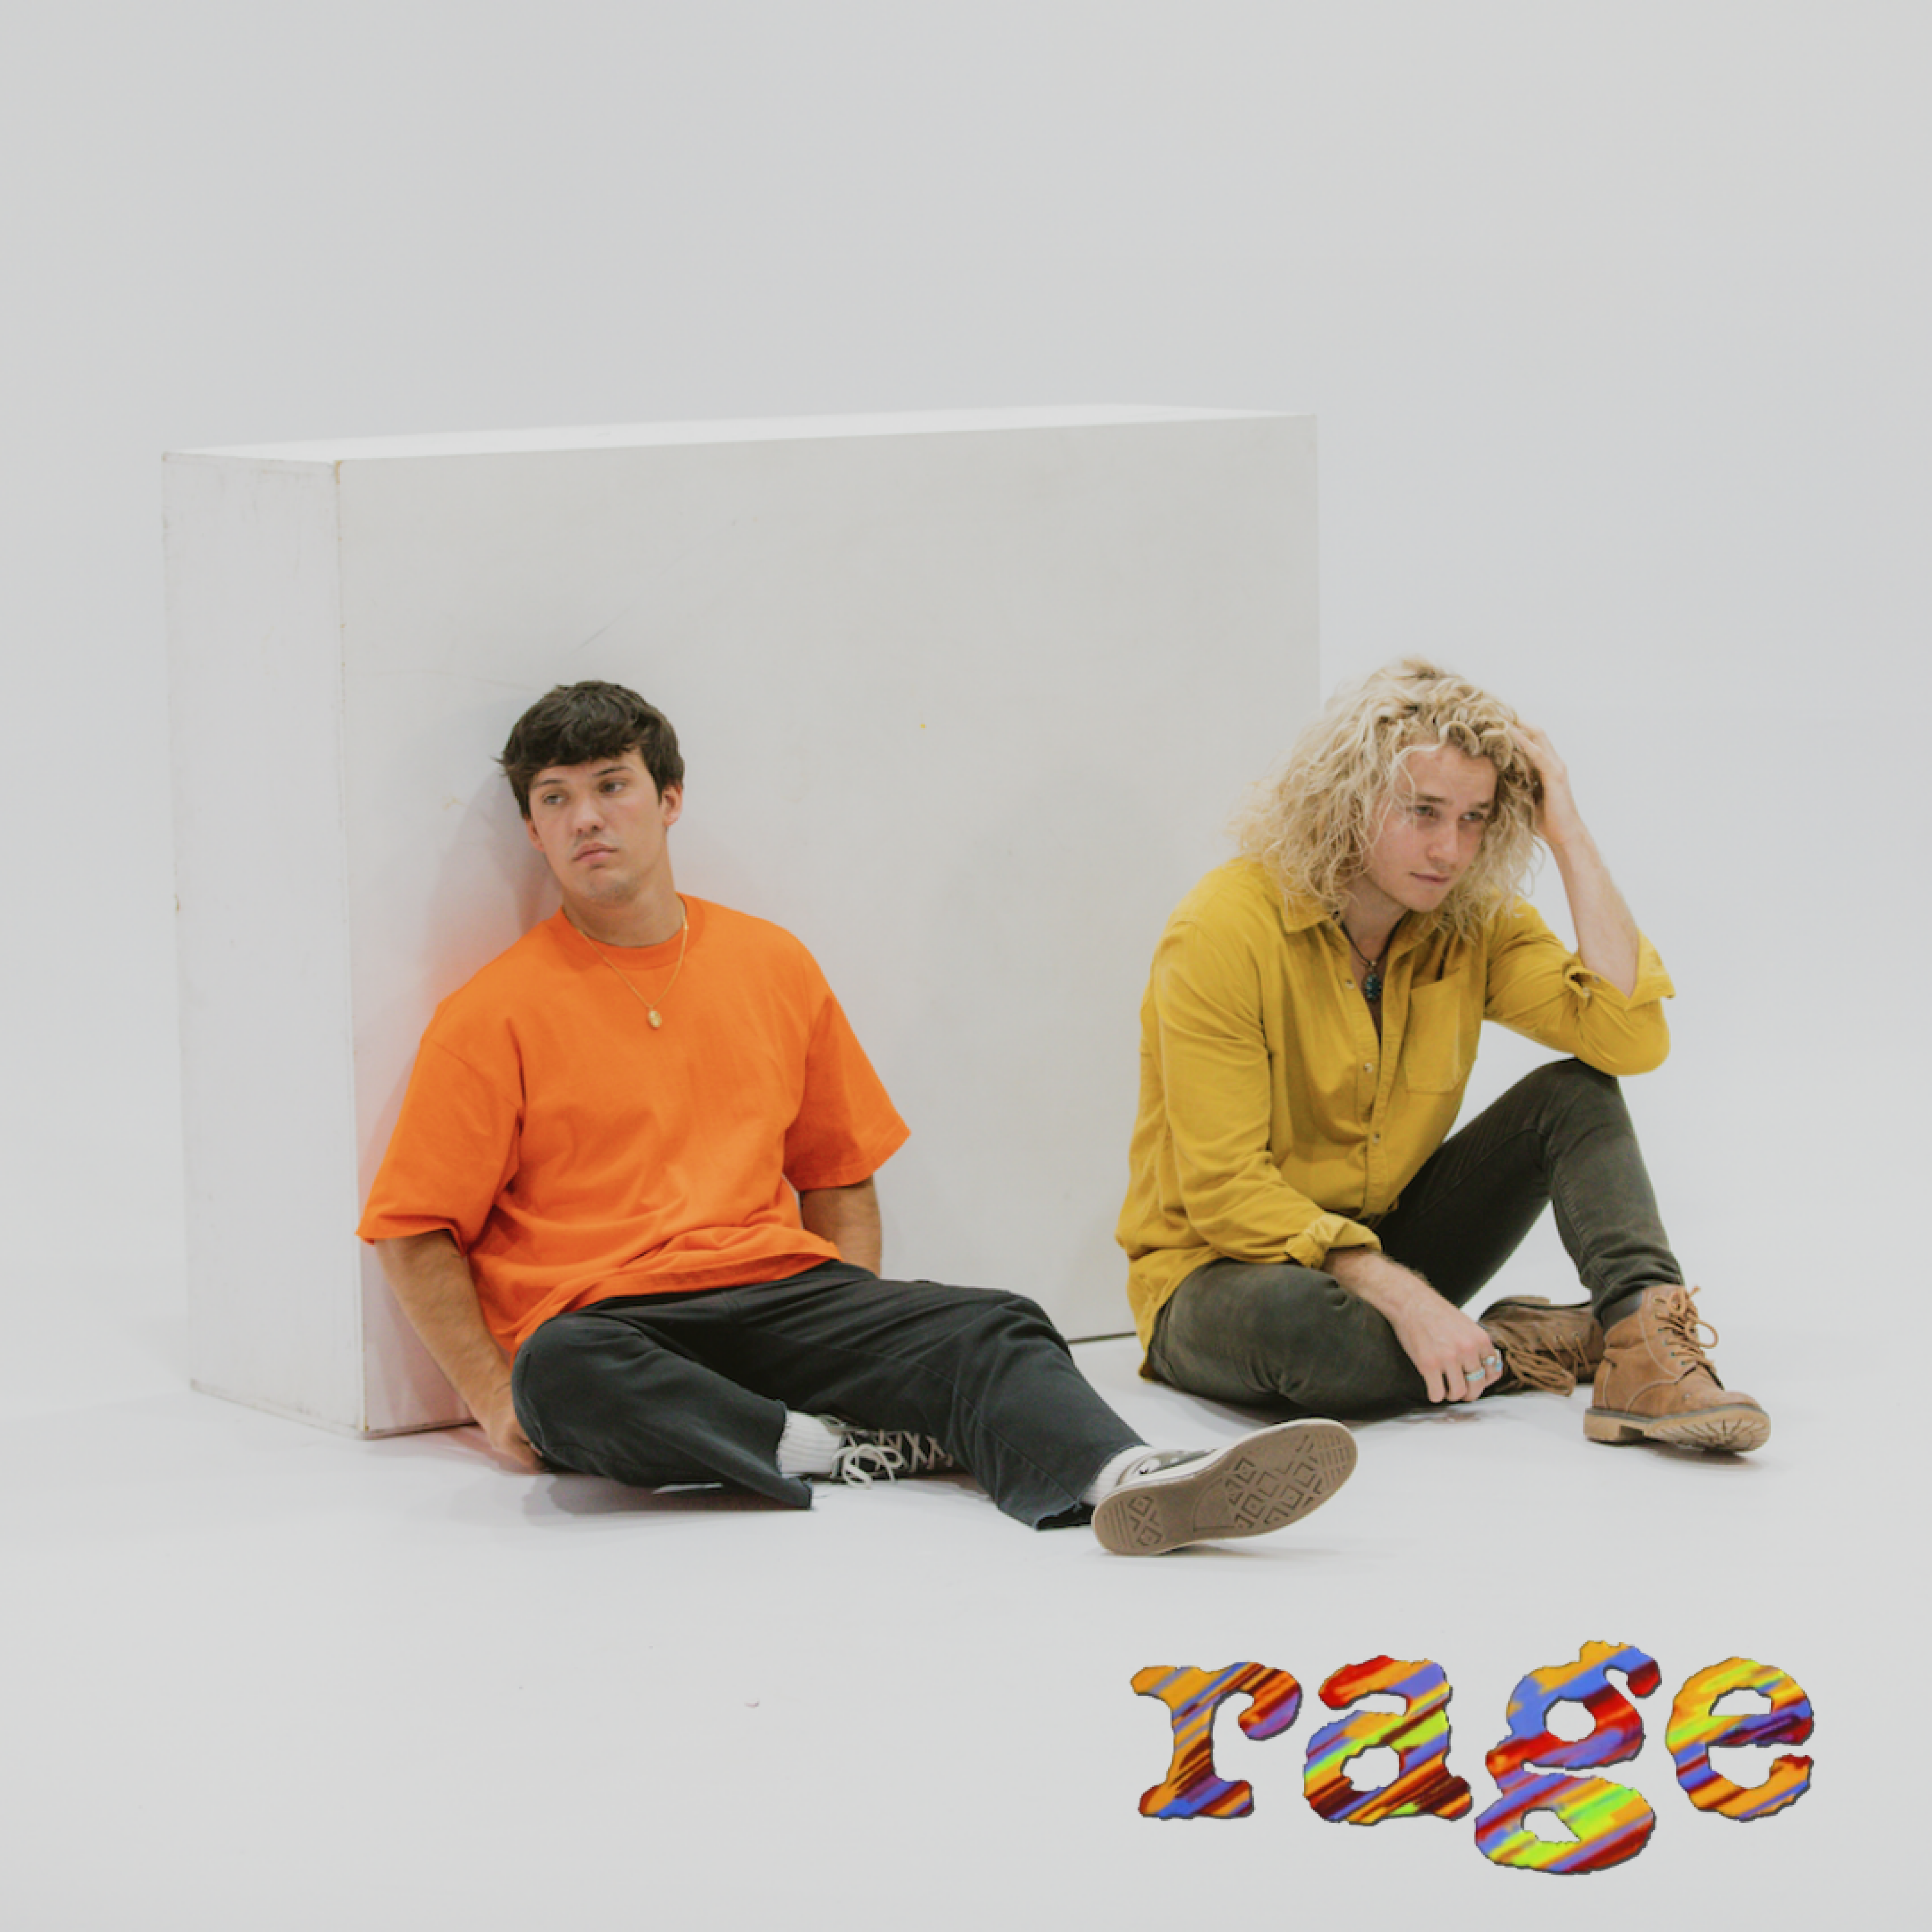 We Are Iso - 'Love N Trust' Added to RAGE